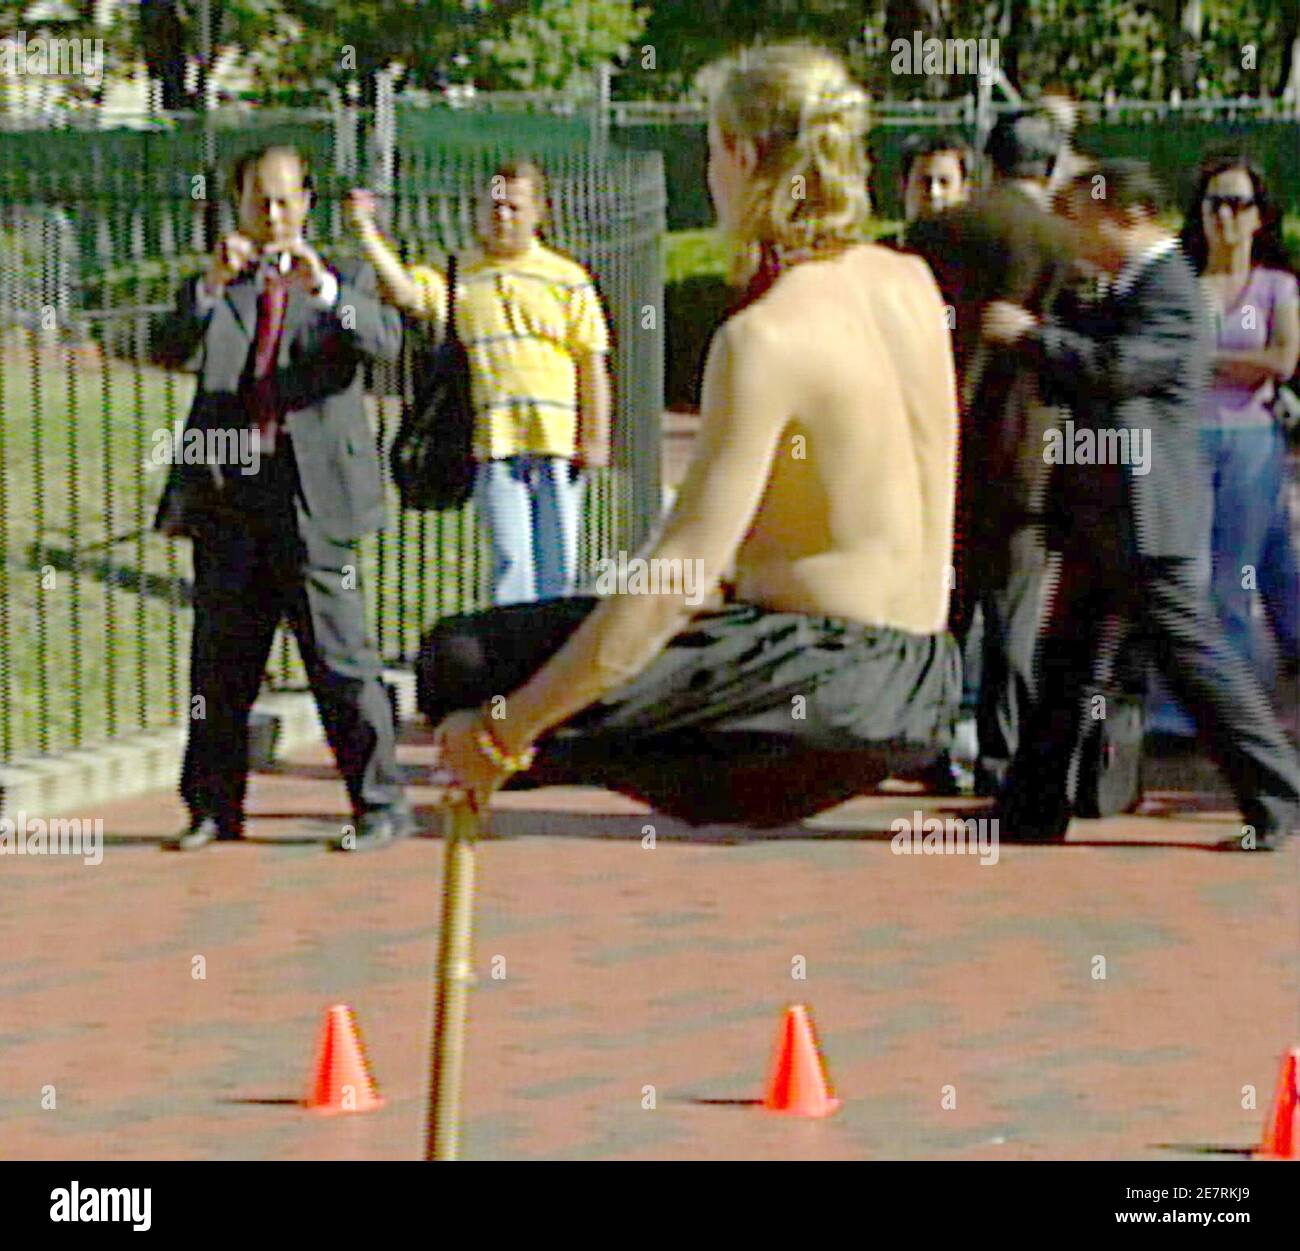 Magician Ramana of the Netherlands performs his 'open air levitation' at Lafayette Park in front of the White House in this image taken from TV footage October 22, 2007. Ramana, who was trained in Indian Magic, is touring various cities in the U.S.   REUTERS/Reuters TV  (UNITED STATES) Stock Photo